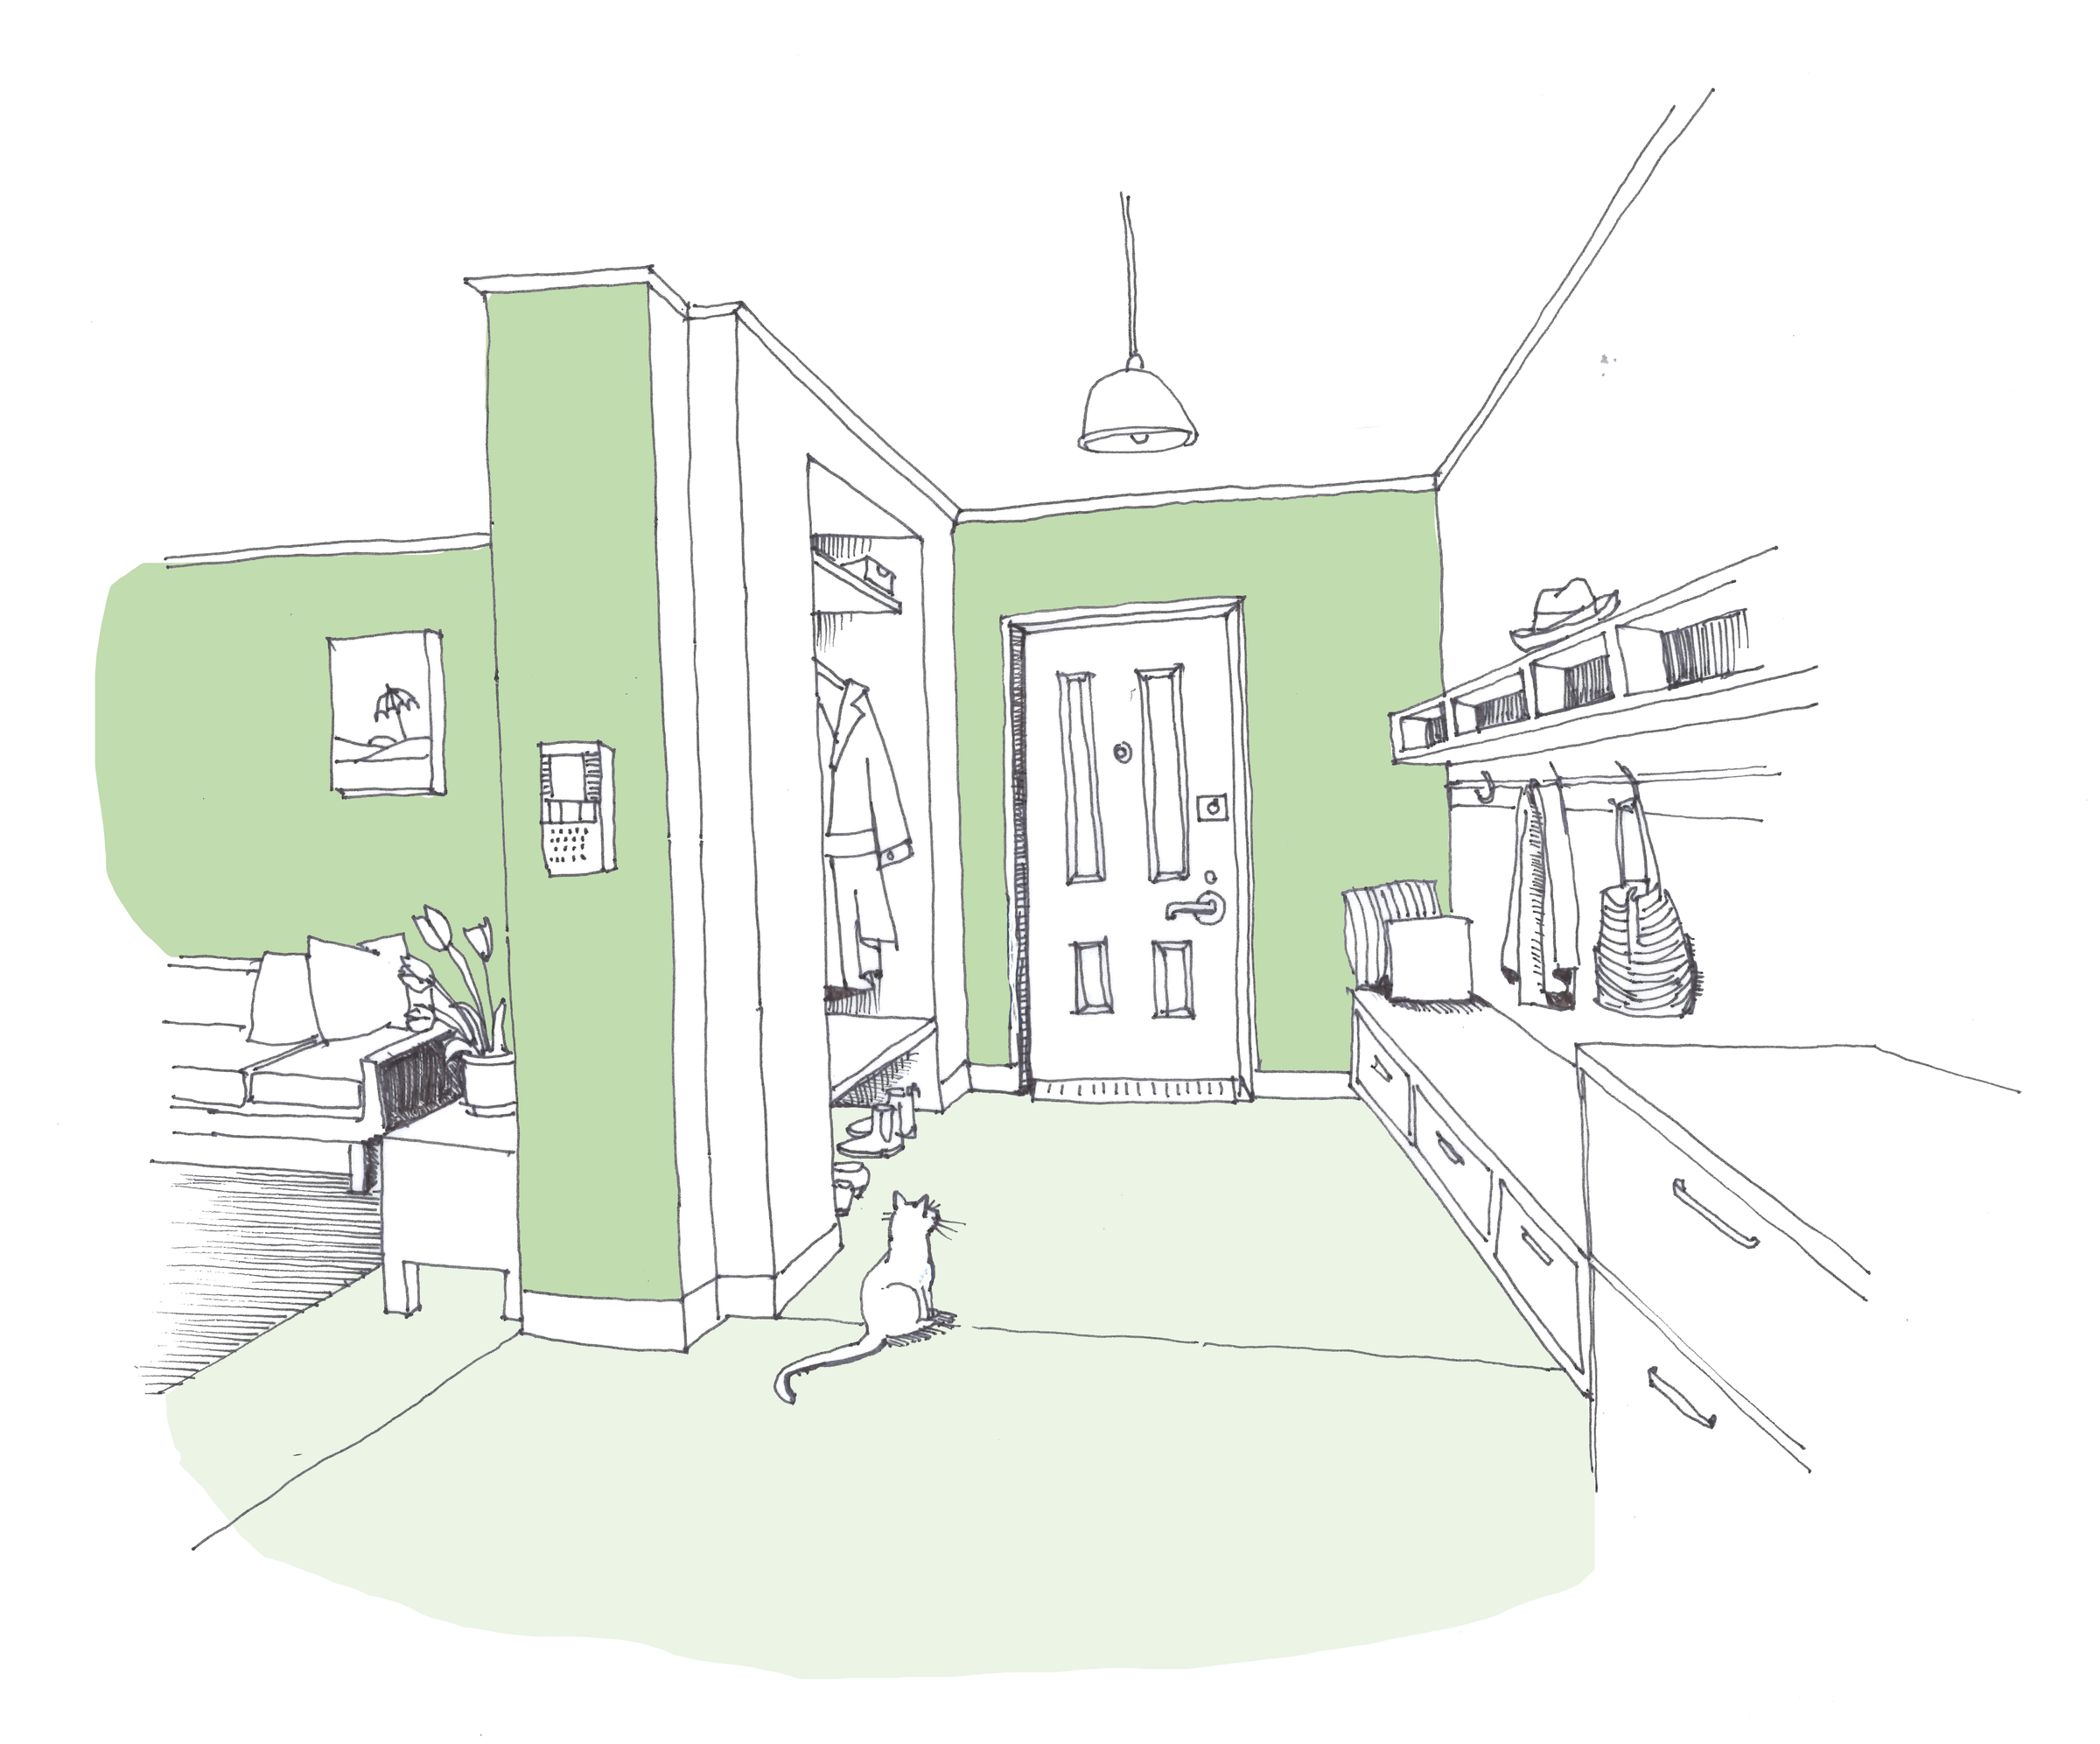 Visualisation of the entry way from 'A Design Guide for Older Women's Housing'